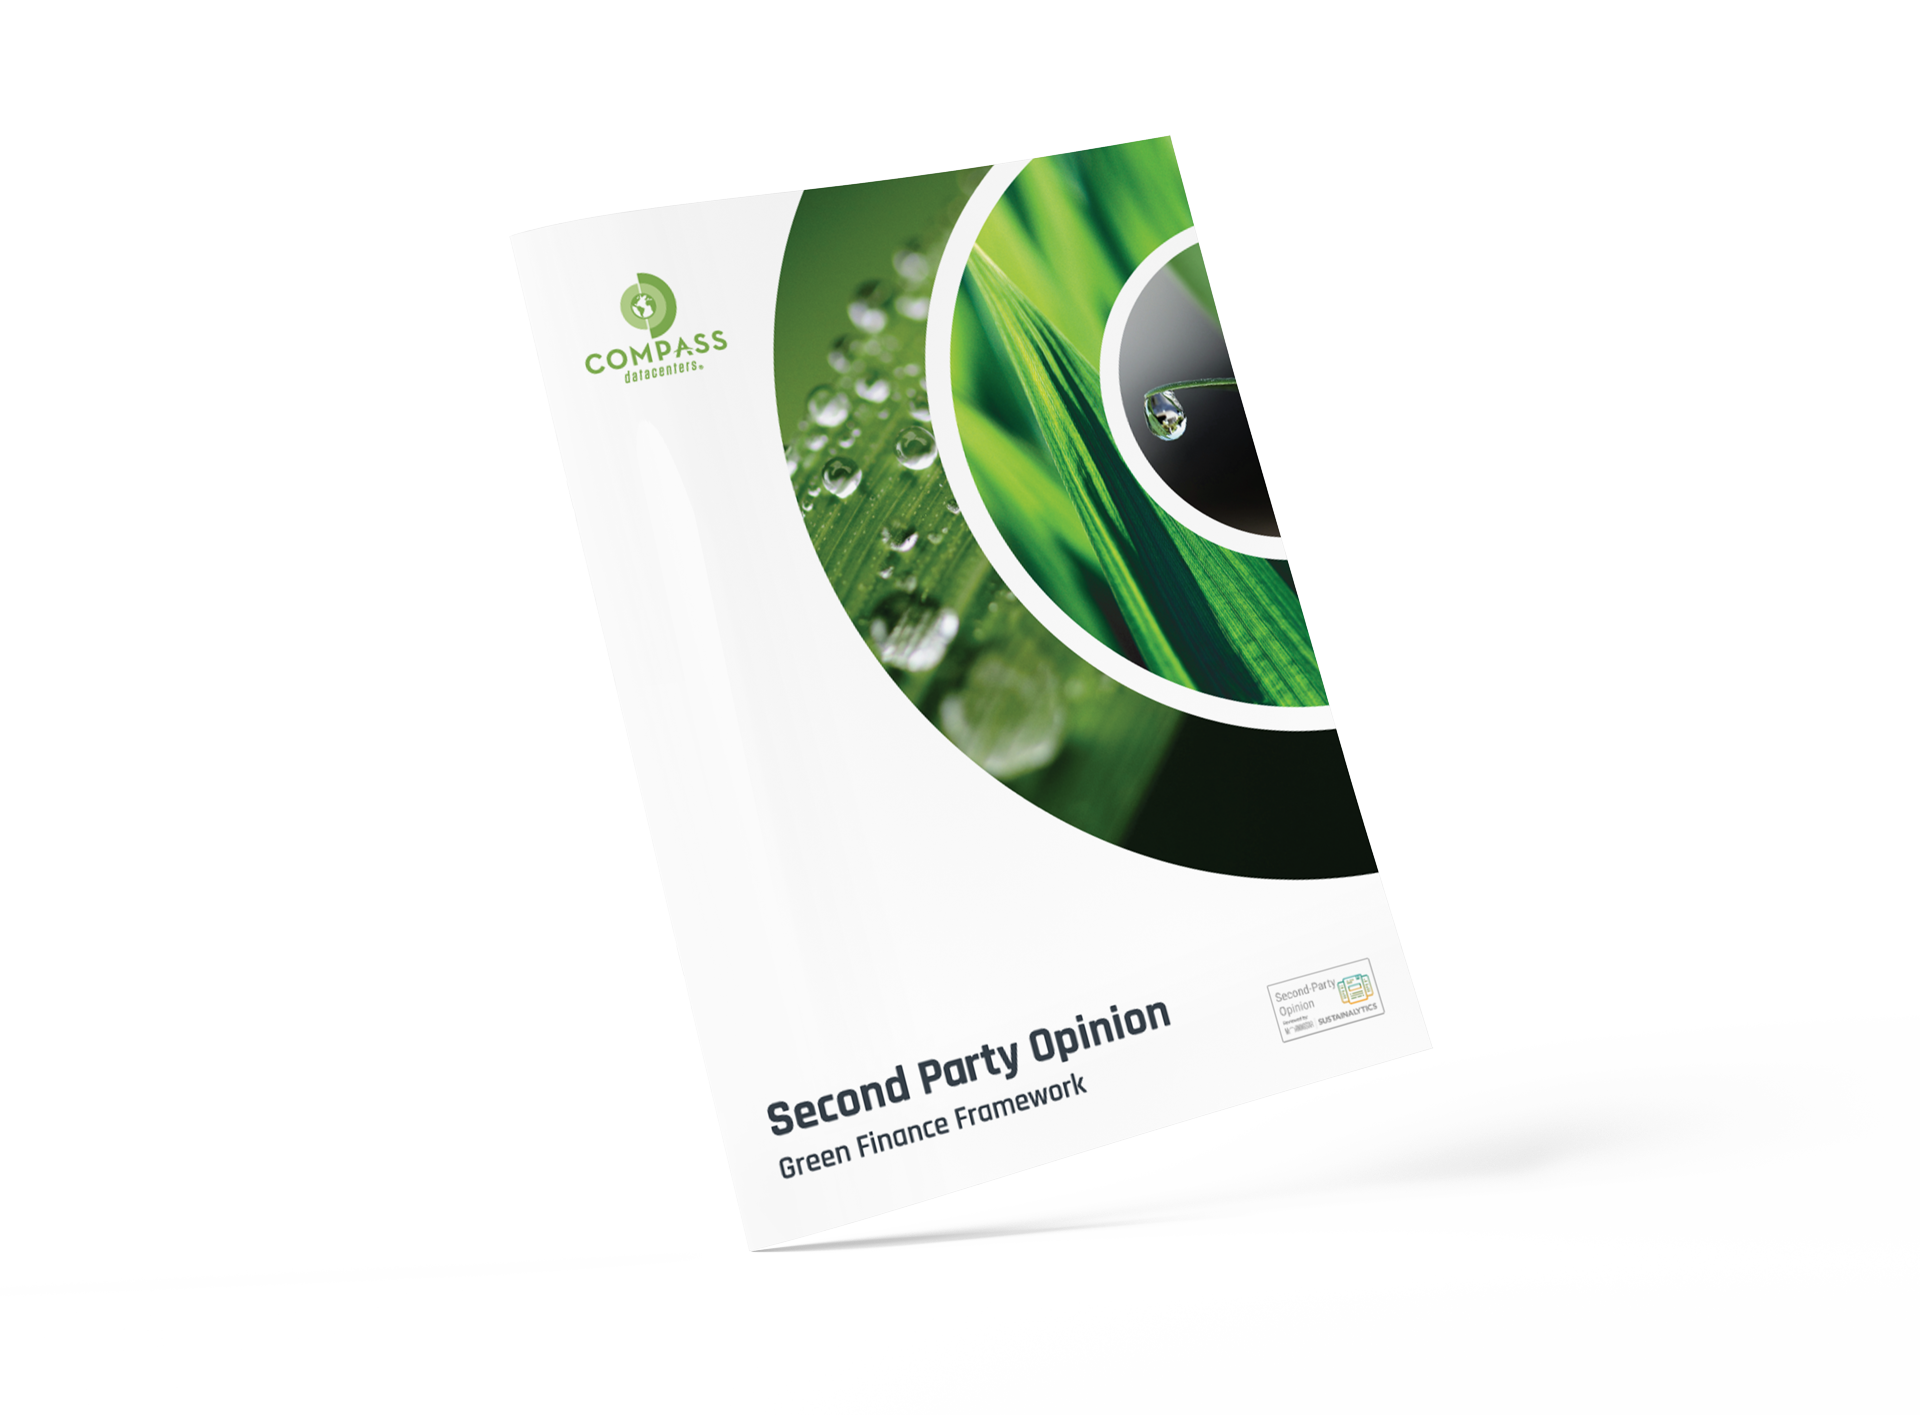 This is a corporate document titled "Second Party Opinion" for a "Green Finance Framework" featuring a nature-inspired cover design with green leaves and water droplets.